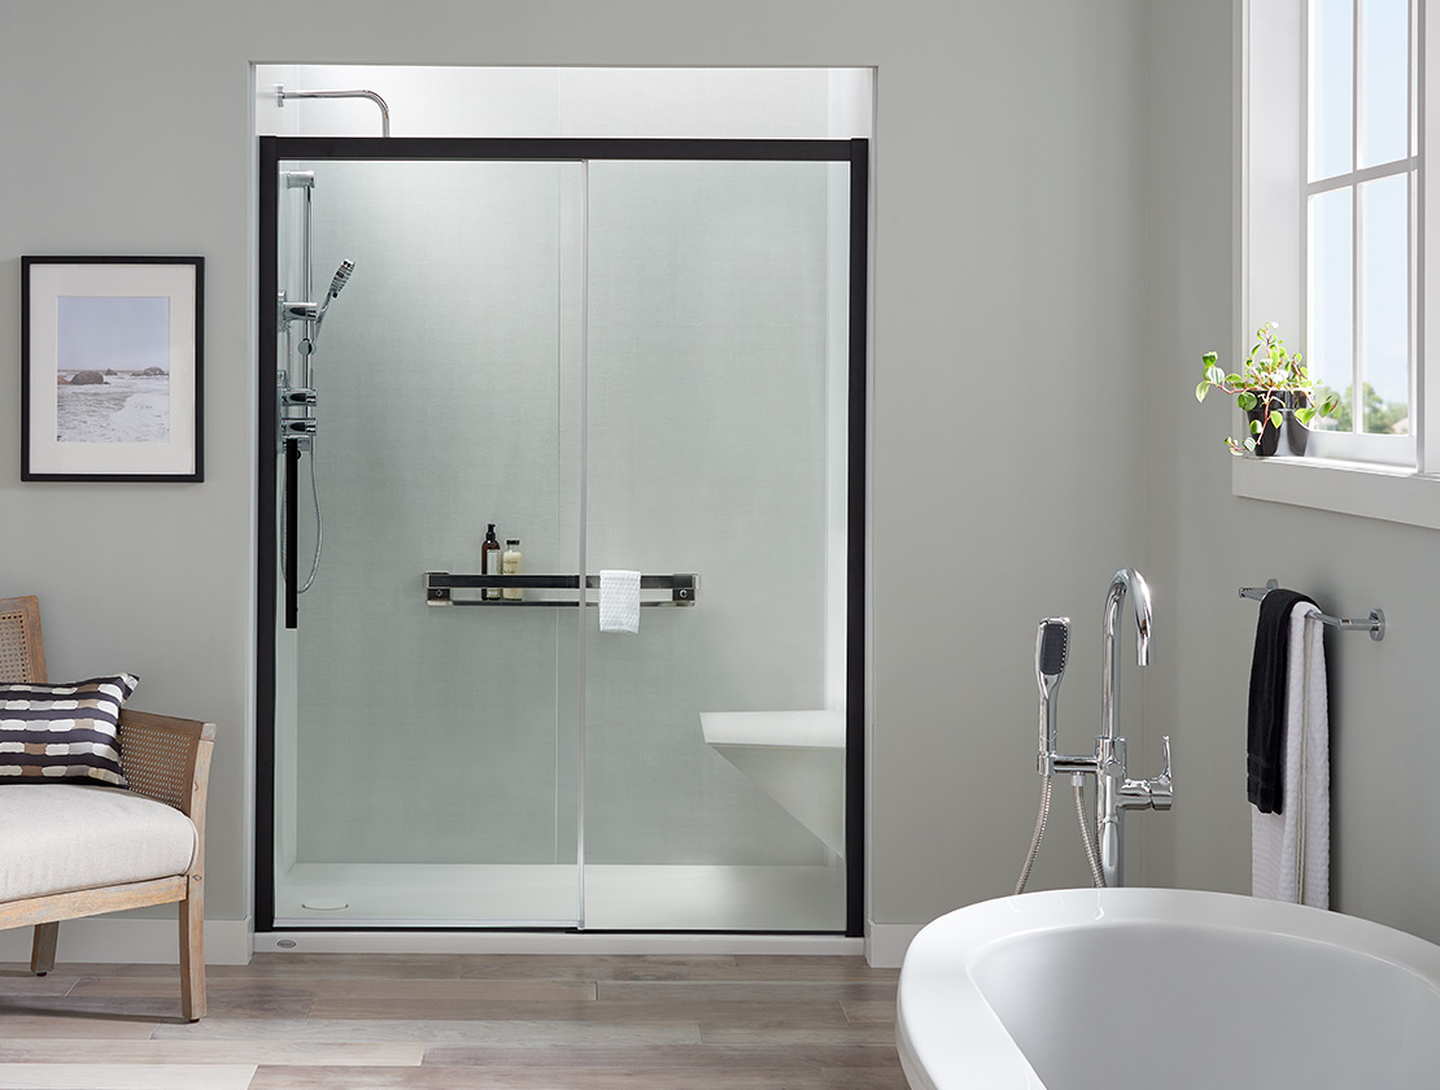 Walk-in showers replacing baths in many remodels